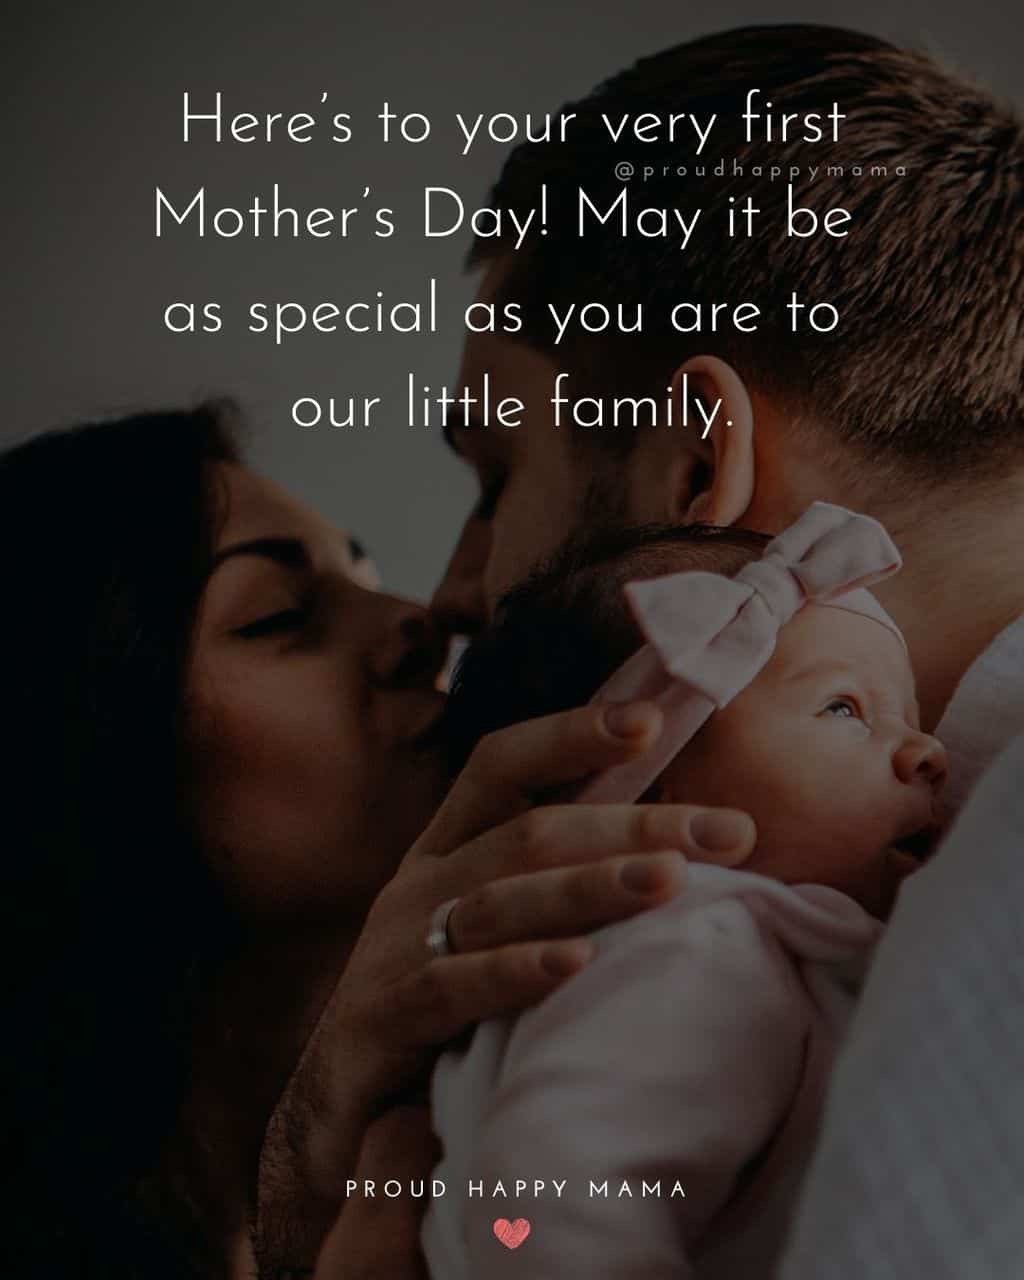 First Mothers Day Quotes - Here’s to your very first Mother’s Day! May it be as special as you are to our little family.’